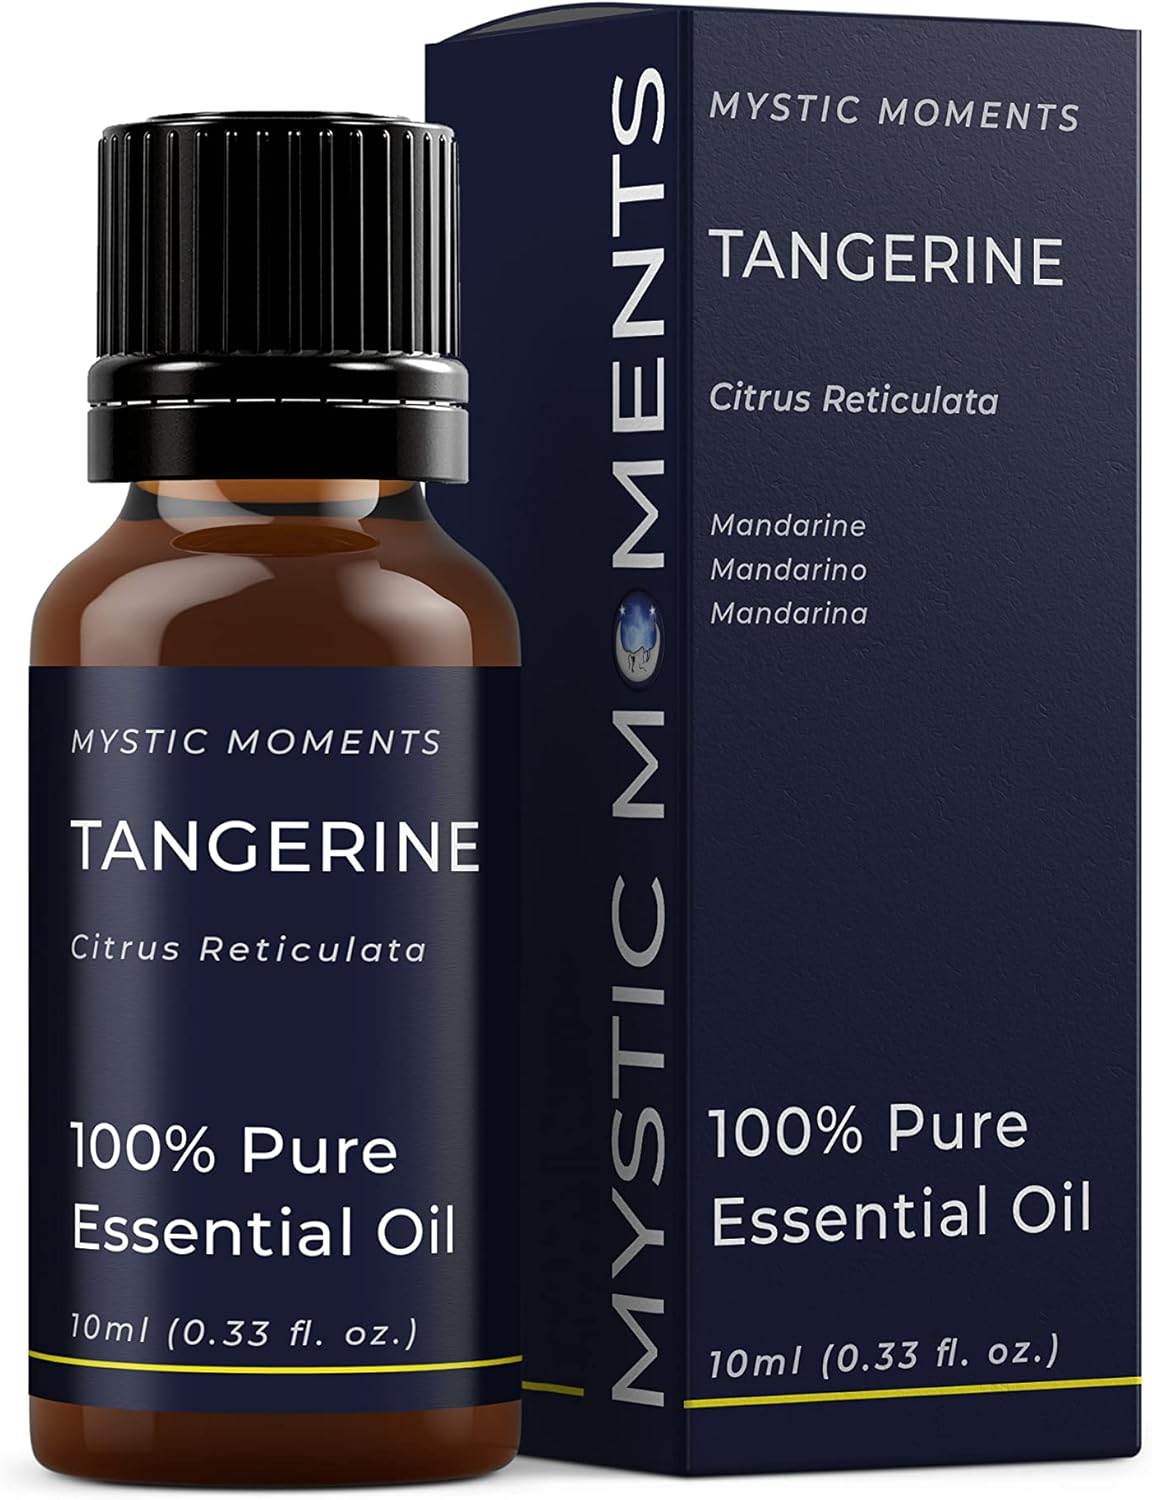 Mystic Moments | Tangerine Essential Oil 10ml - Pure & Natural oil for Diffusers, Aromatherapy & Massage Blends Vegan GMO Free